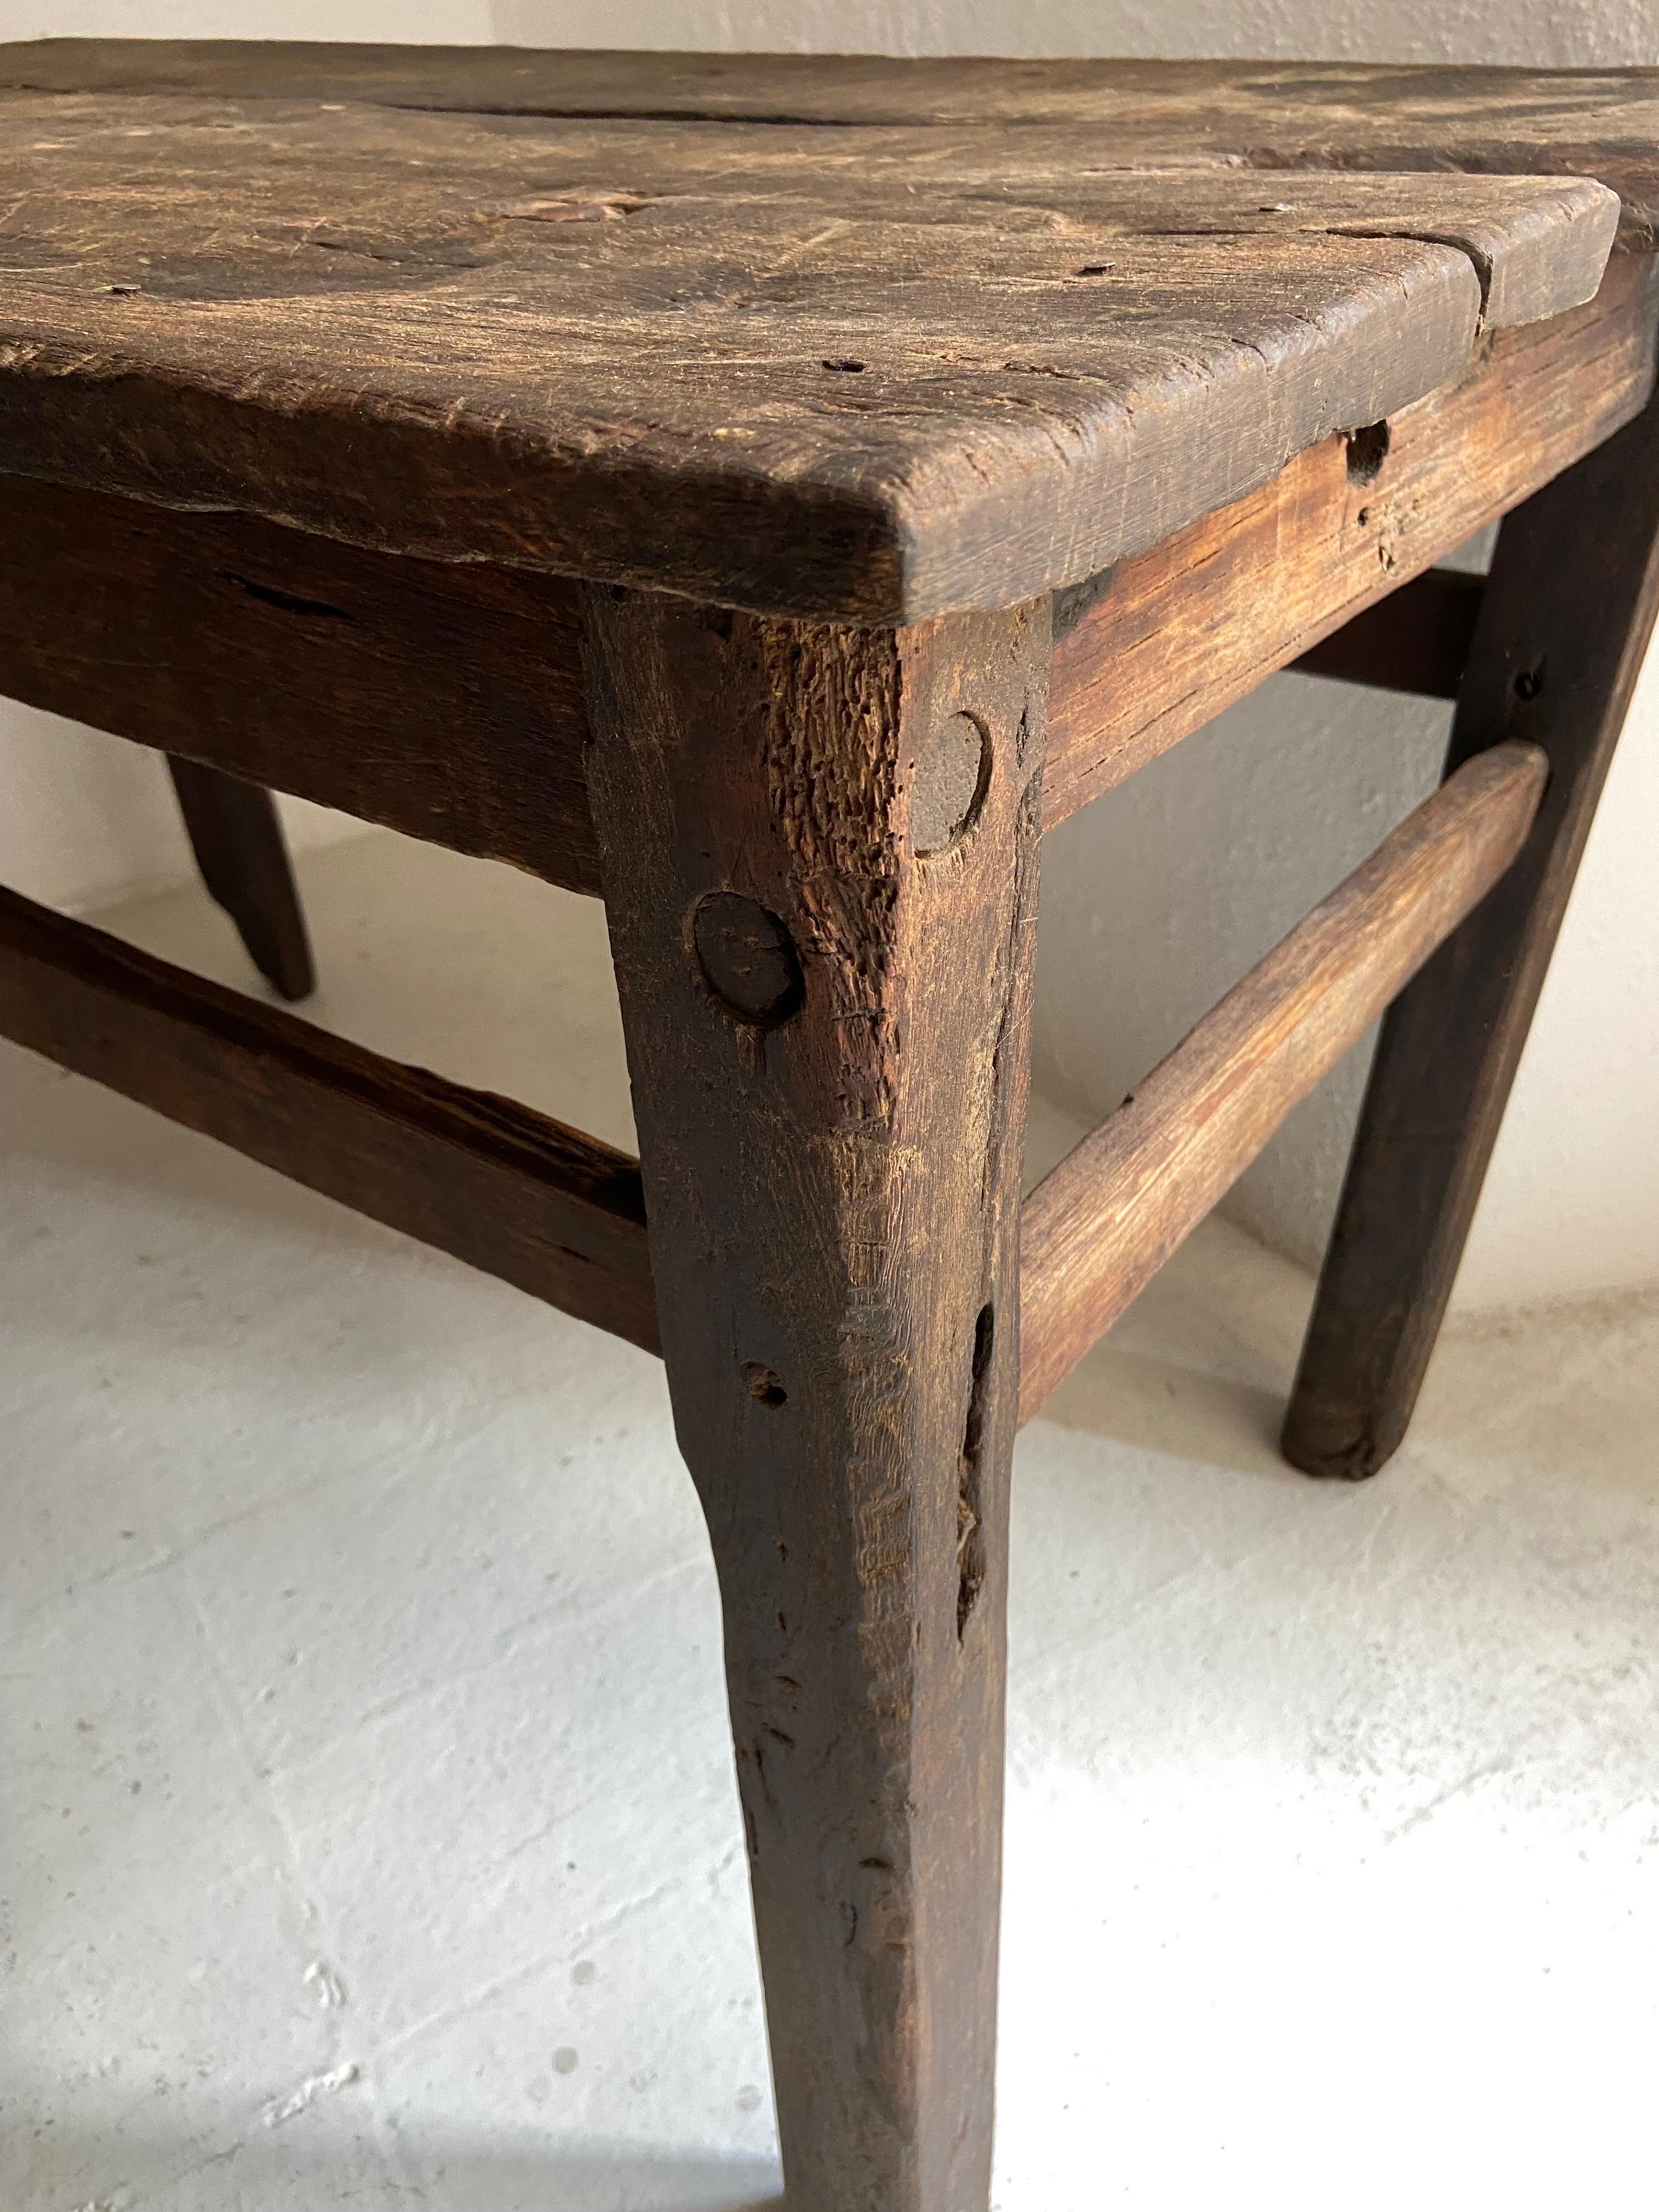 Colonial table made from mesquite hardwood in the mid 18th century. Acquired in the outskirts of Dolores Hidalgo, Guanajuato.